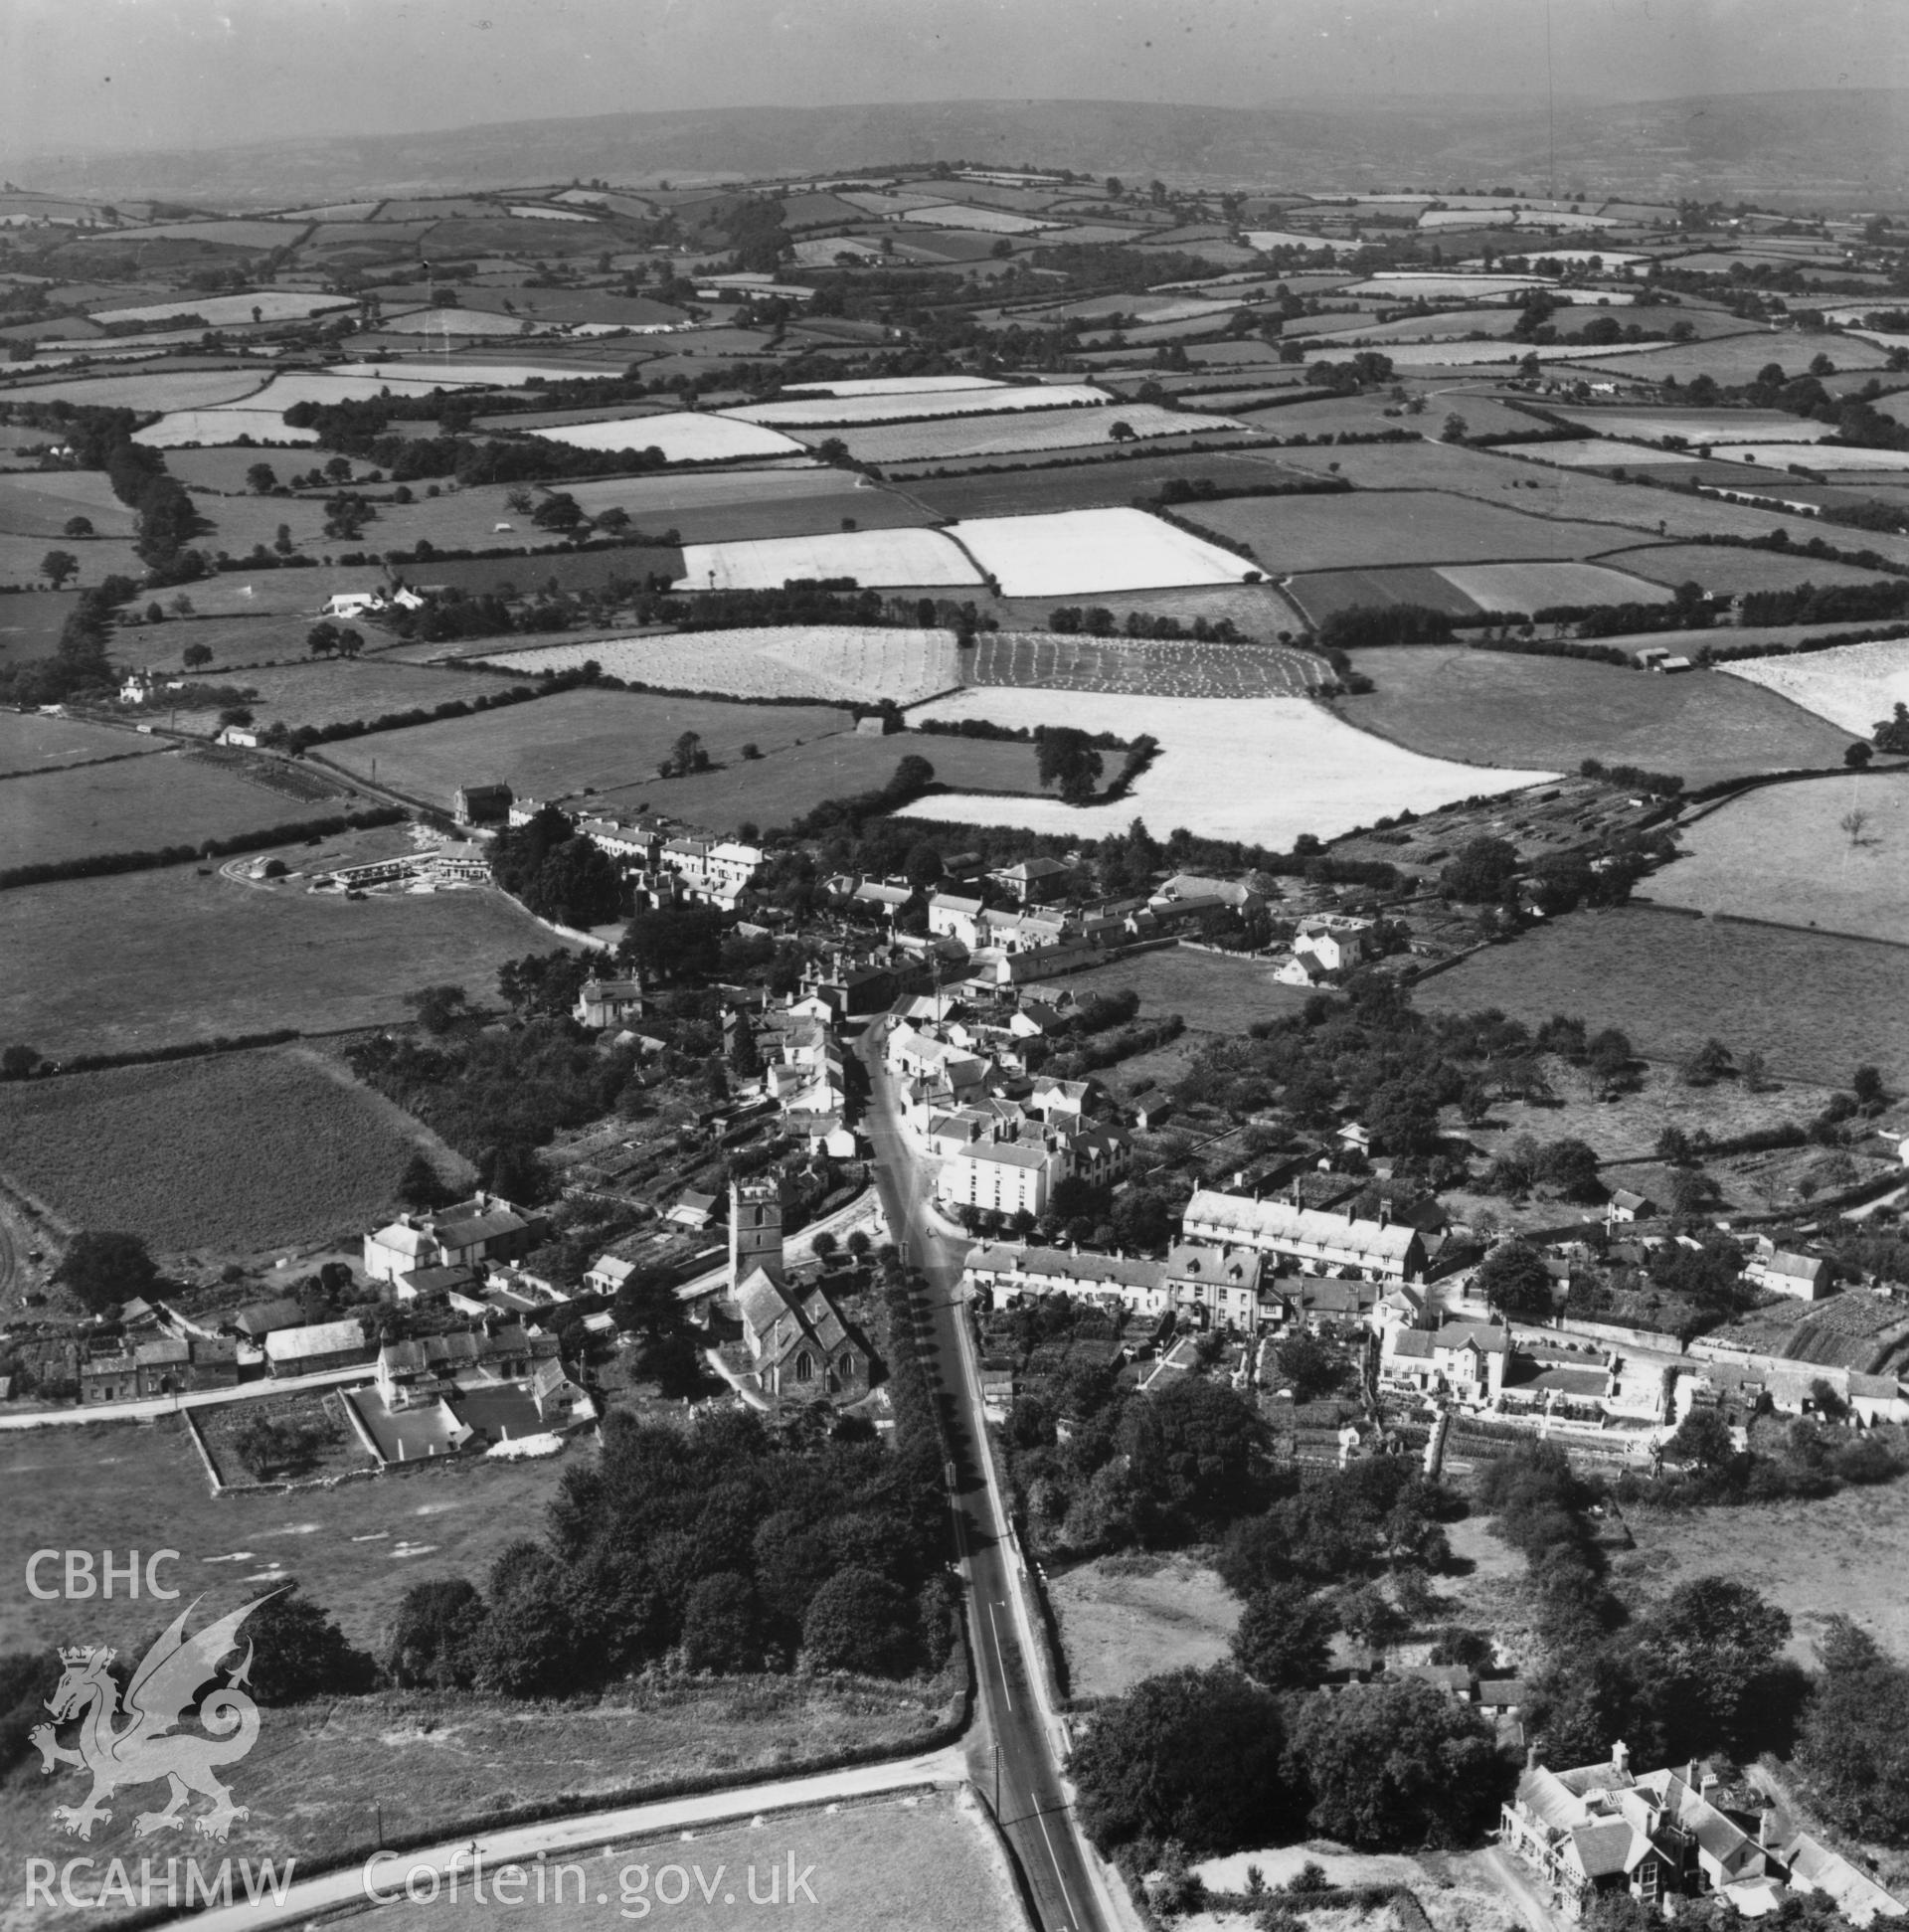 View of Raglan from the north east. Oblique aerial photograph, 5?" cut roll film.